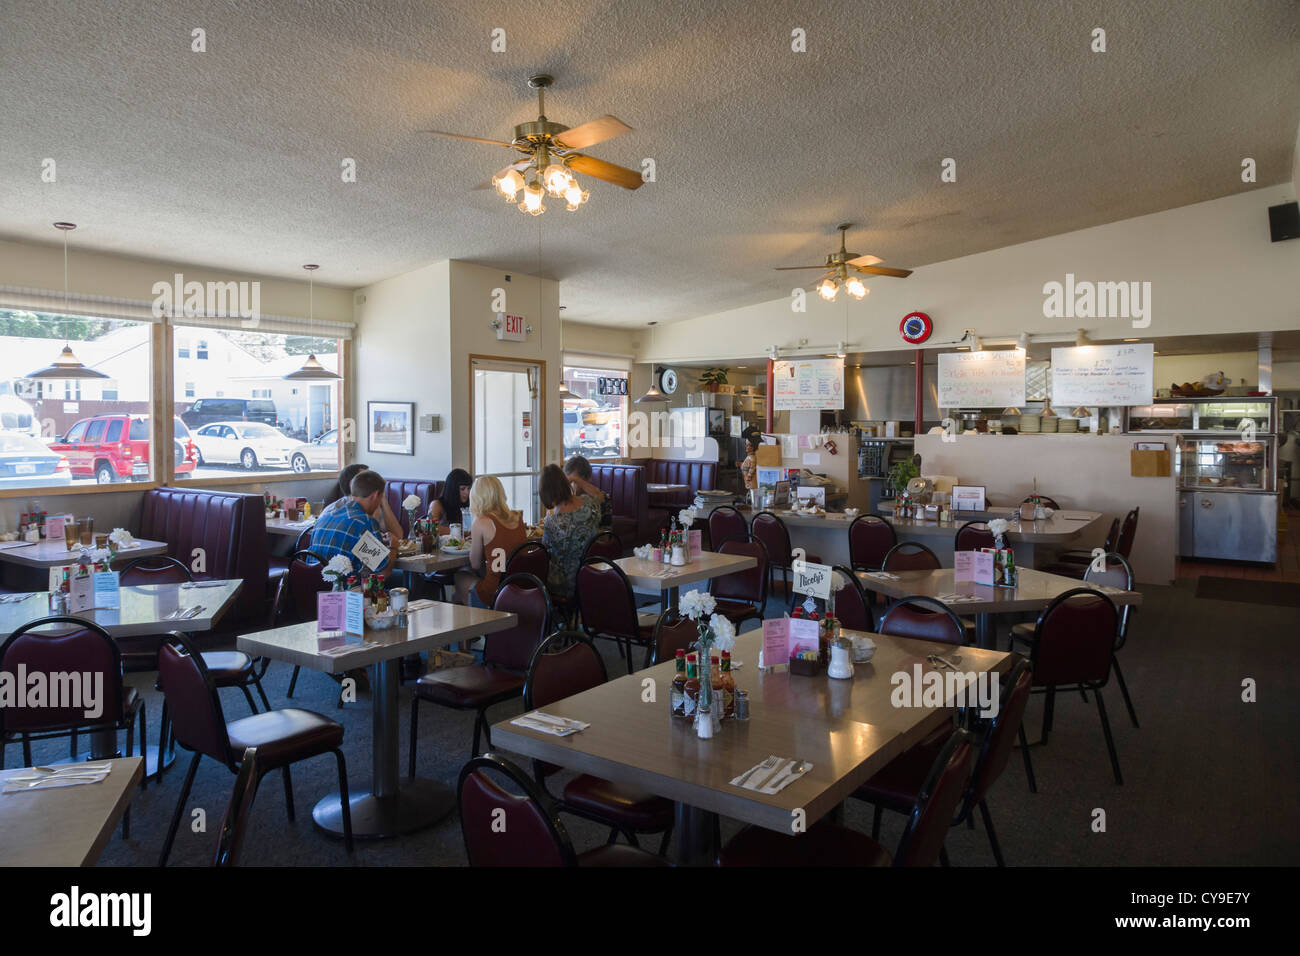 Nicely's Diner, Lee Vining, California - a traditional highway stop on Route 395 near Mono Lake and the Tioga Pass to Yosemite. Stock Photo